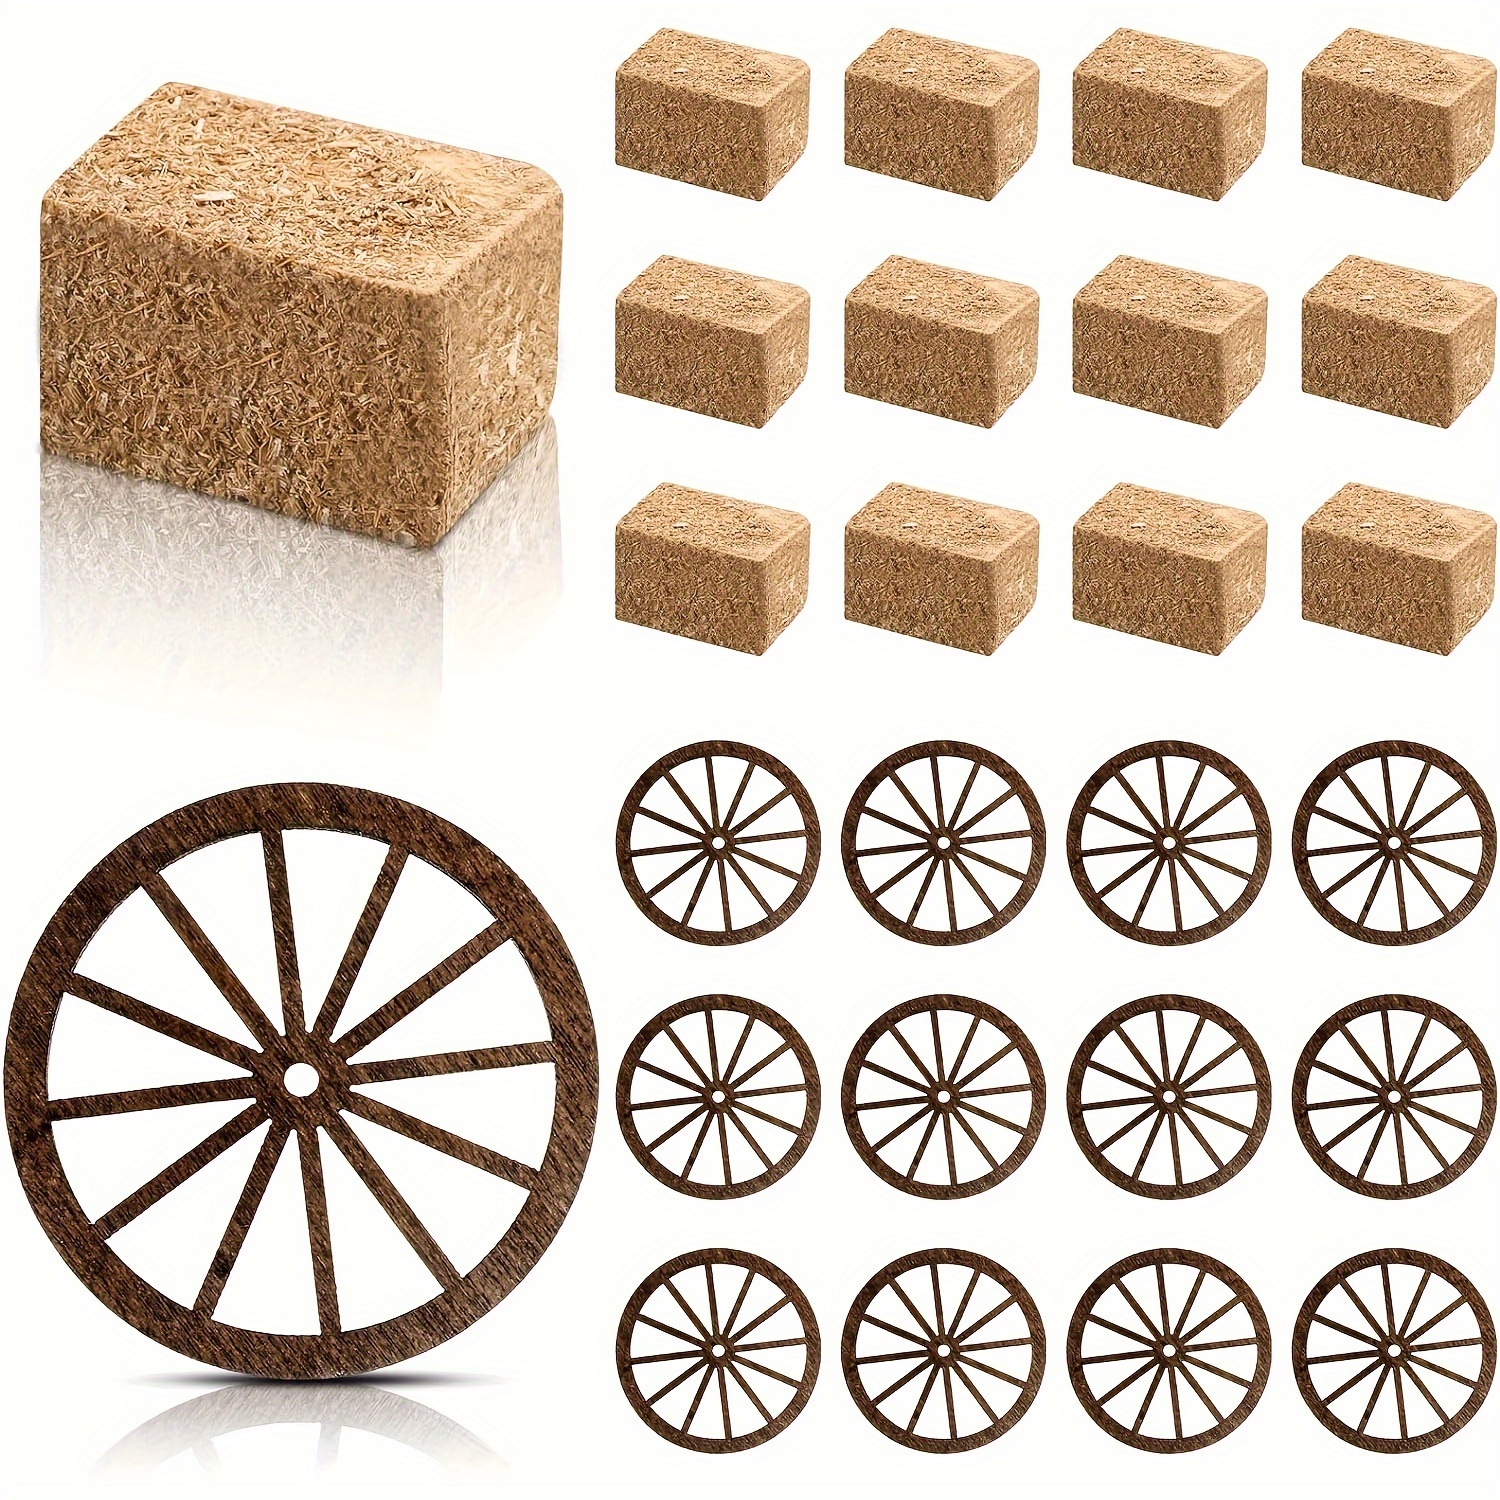 

8-piece Western Cowboy Party Decor Set - Vintage Table Centerpieces With Mini Horseshoes, Cowboy Hats & Wagon Wheels - Perfect For Birthday, Wedding & Rodeo Themed Events